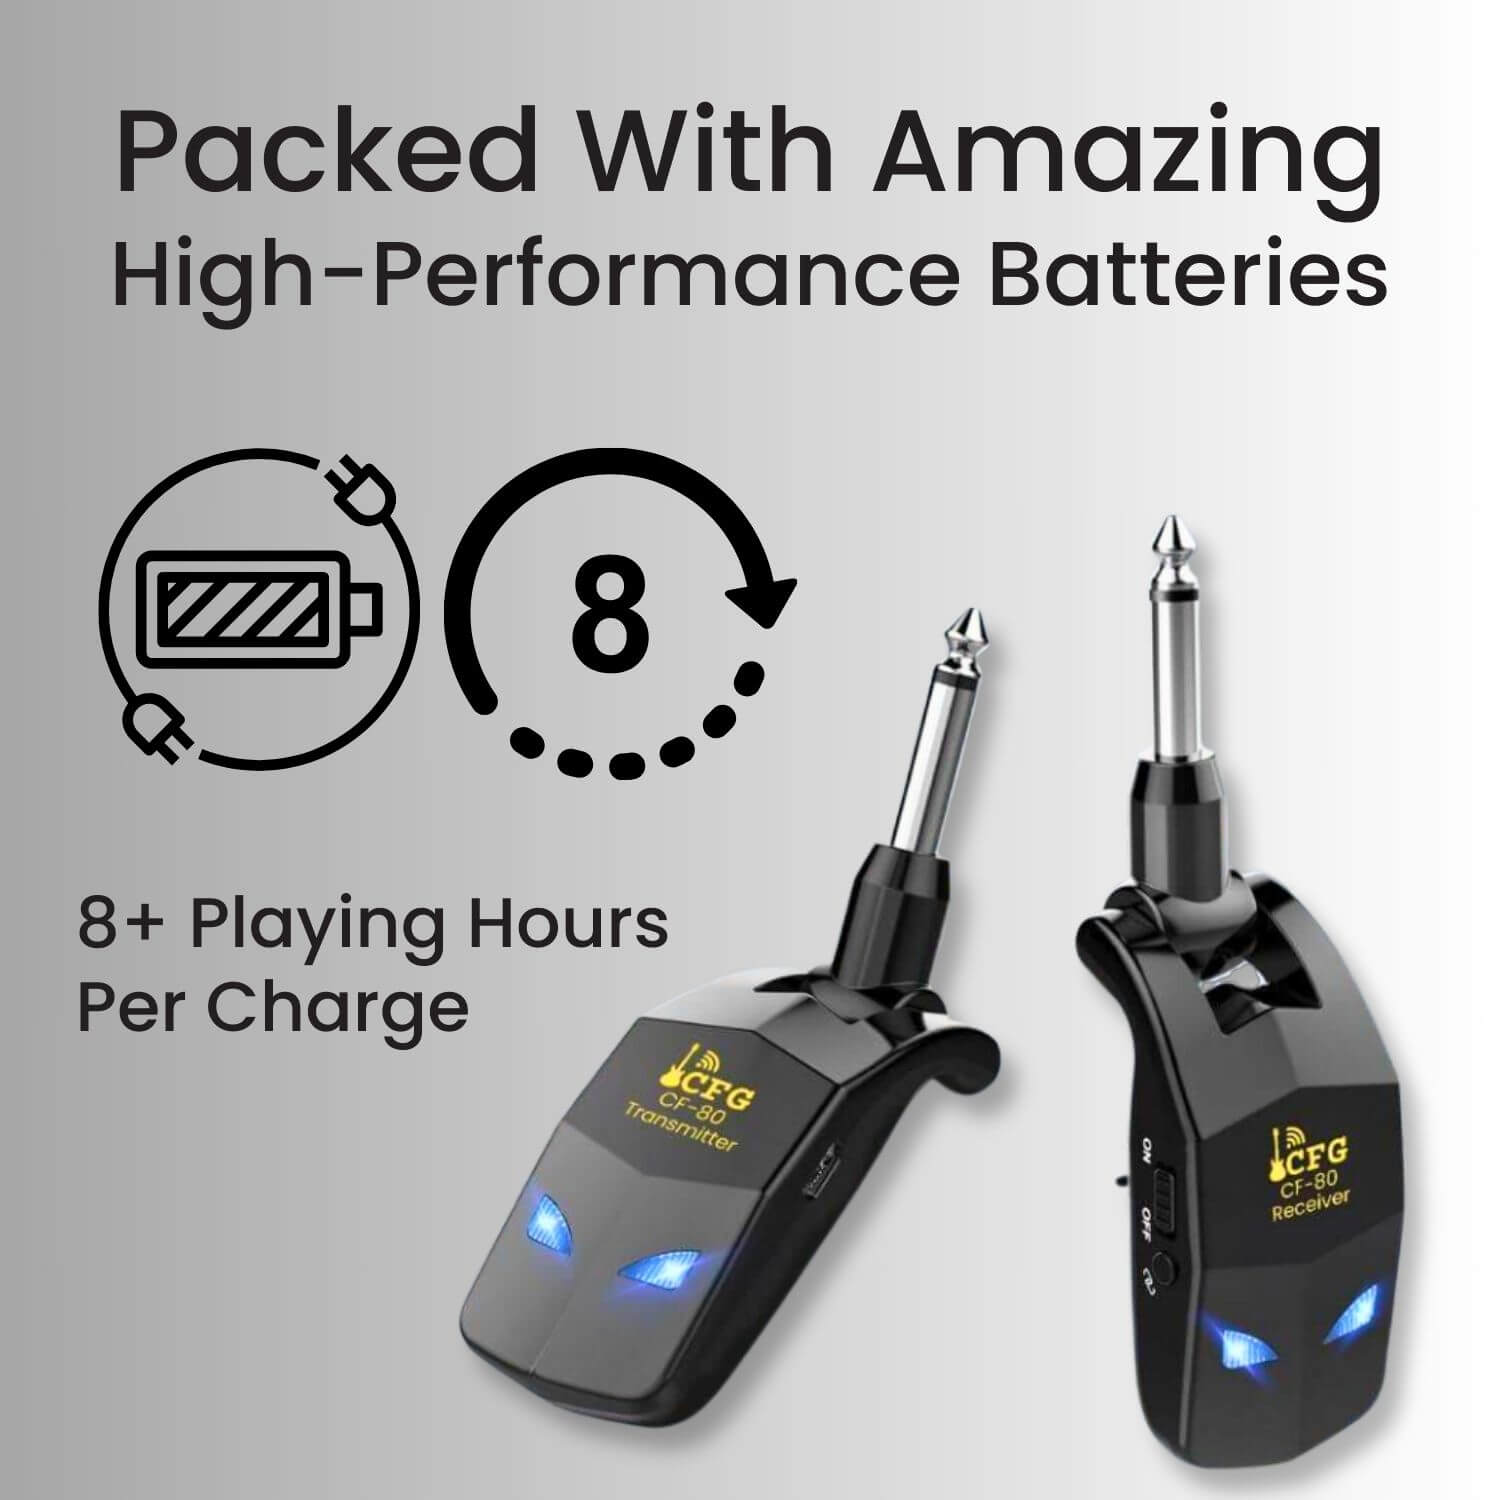 The image features the CFG CF-80 wireless system's transmitter and receiver against a grey background. The text 'Packed With Amazing High-Performance Batteries' is prominently displayed, along with icons illustrating a battery and an 8-hour cycle, emphasizing the system's durable battery life. The units are black with blue LED indicators lit, and the caption '8+ Playing Hours Per Charge' reinforces the long-lasting playtime capability of these devices.